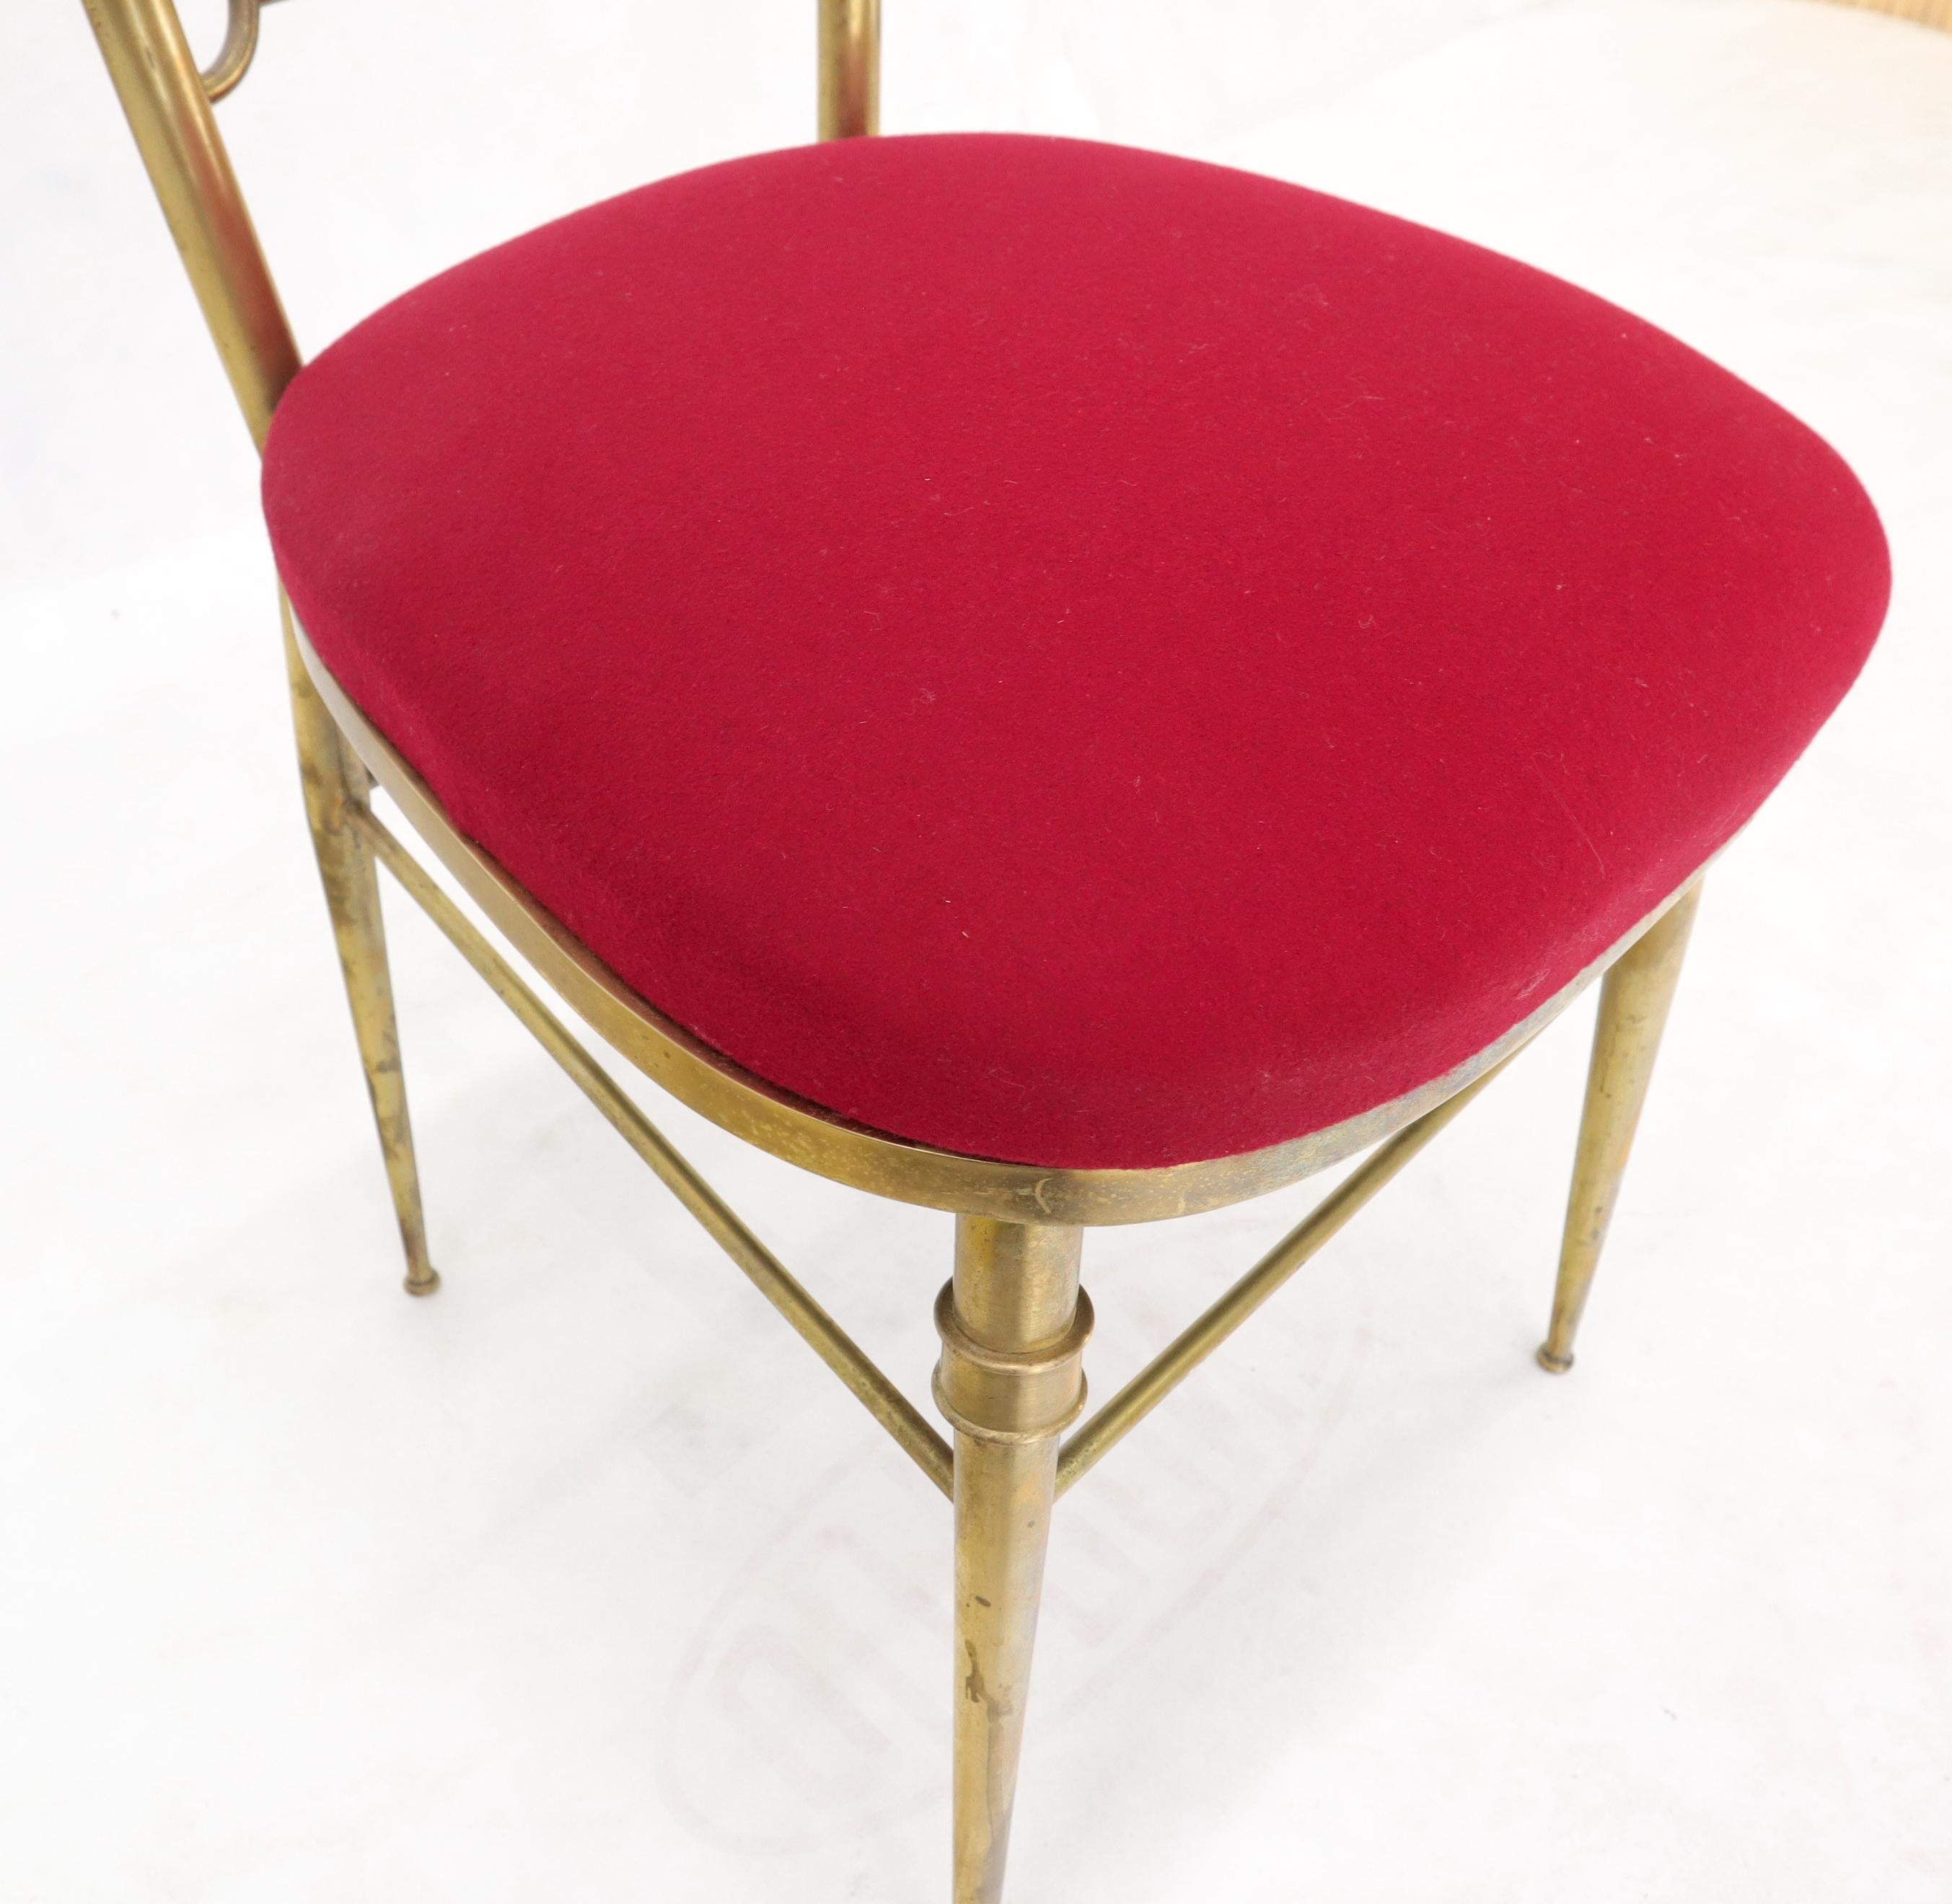 Set of 3 Italian Solid Brass Chiavari Chairs From 1950s New Upholstery For Sale 4